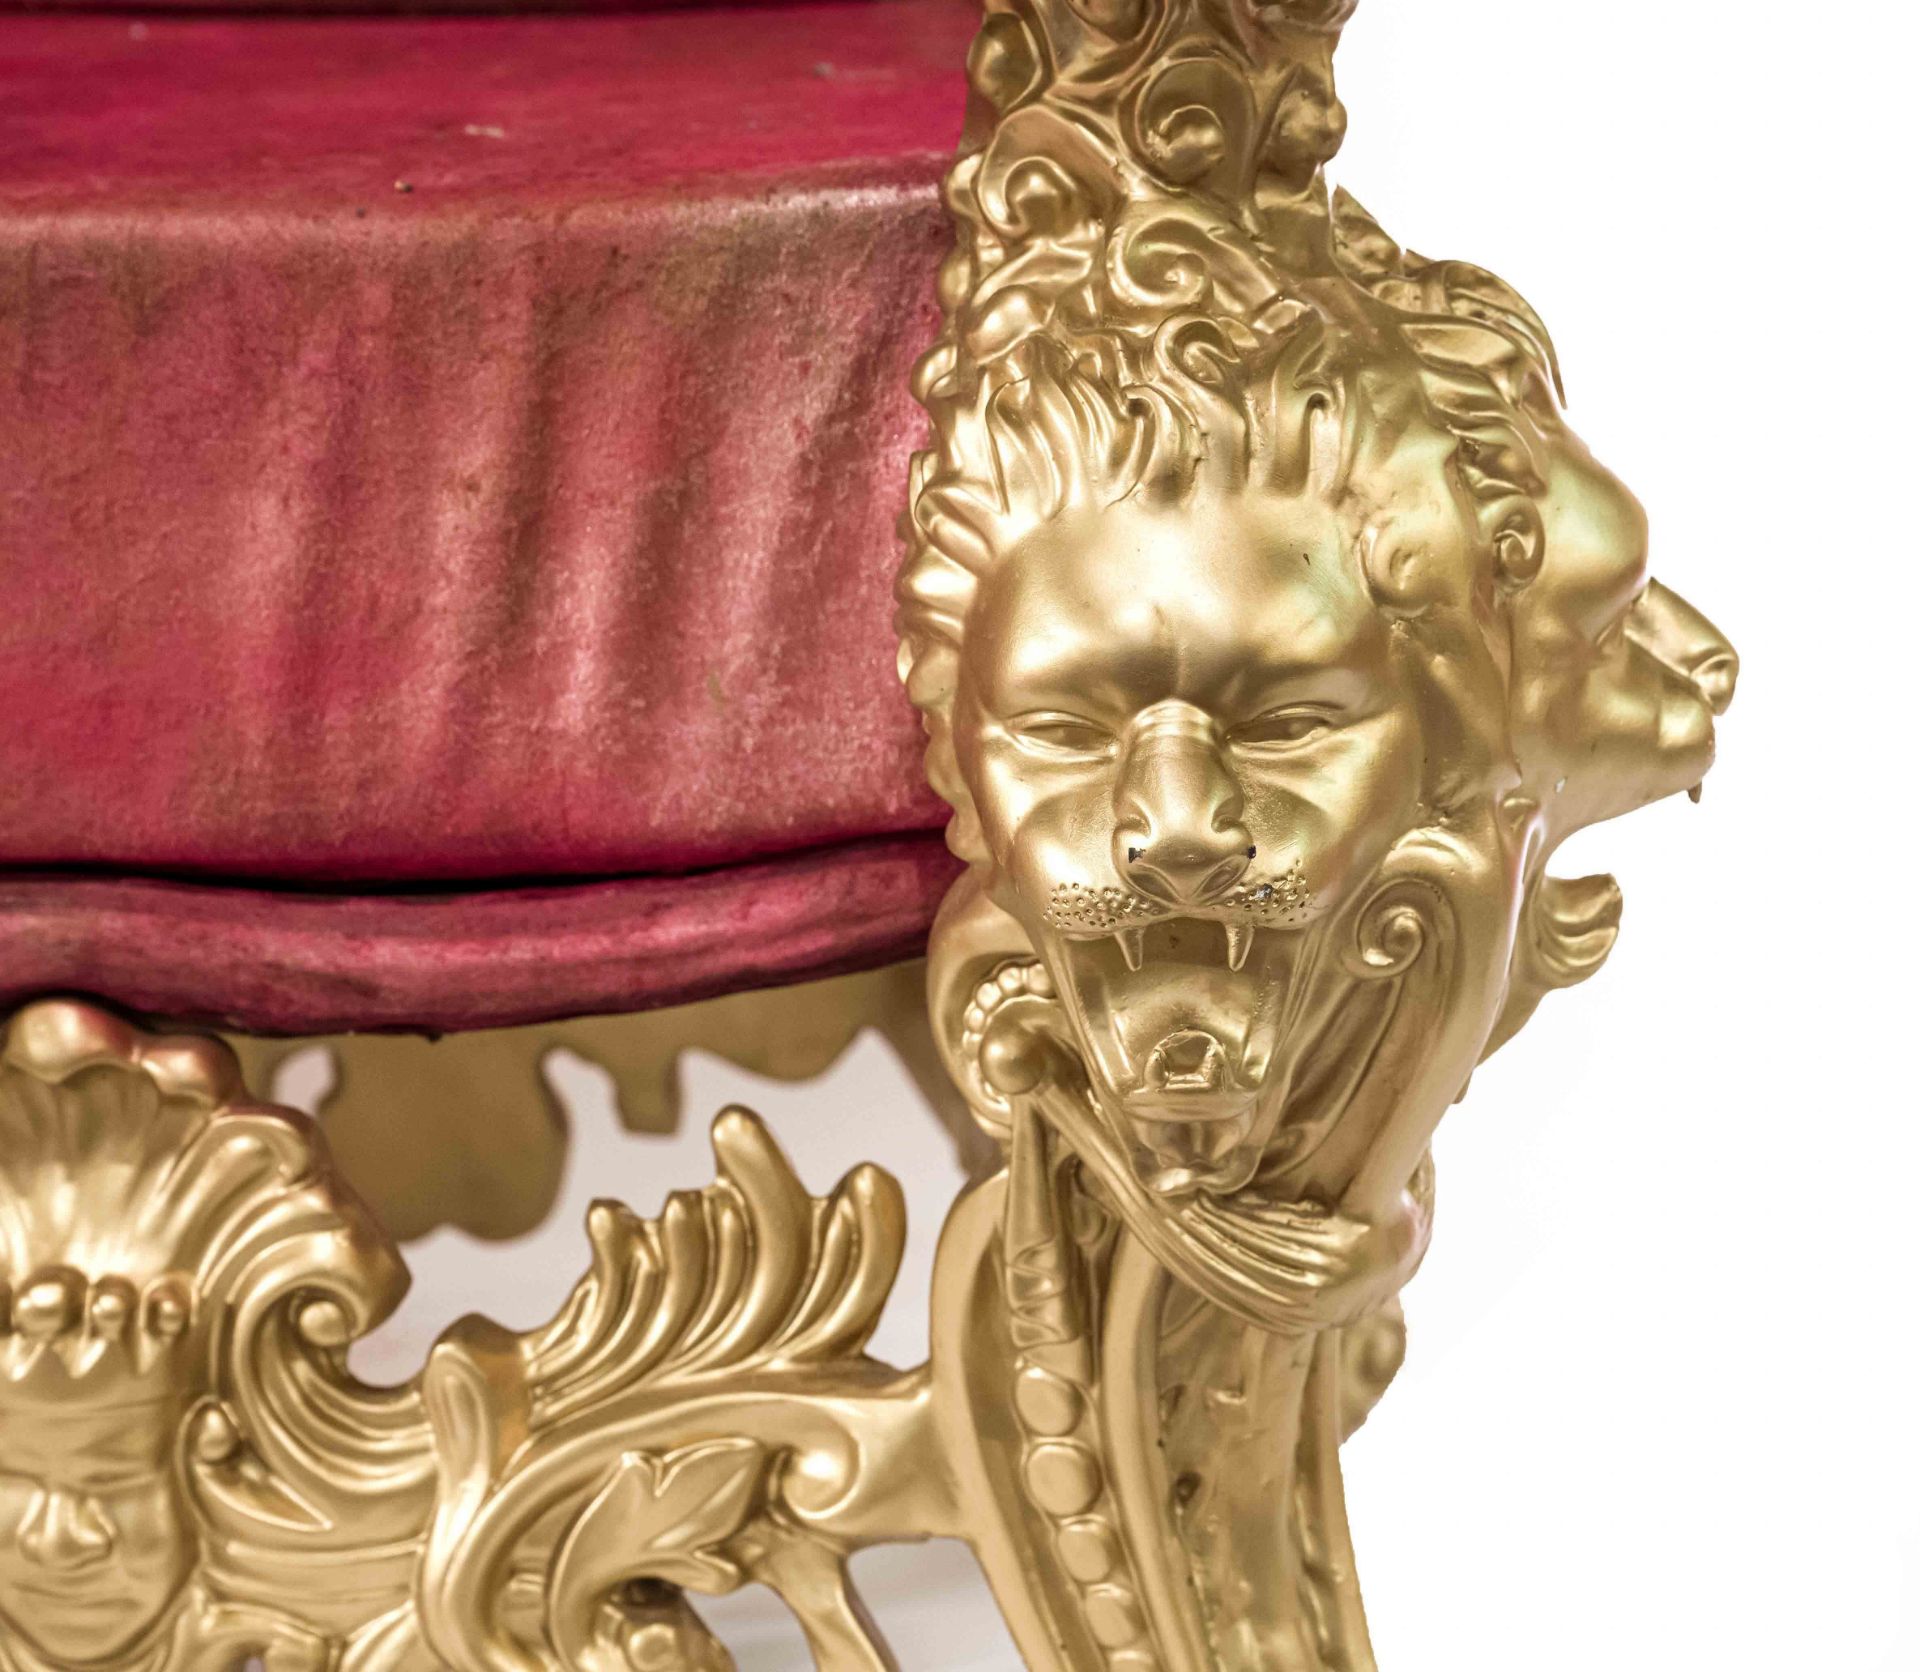 Magnificent Baroque-style throne armchair, 20th century, carved and gilded wood, carved lion's - Image 3 of 5